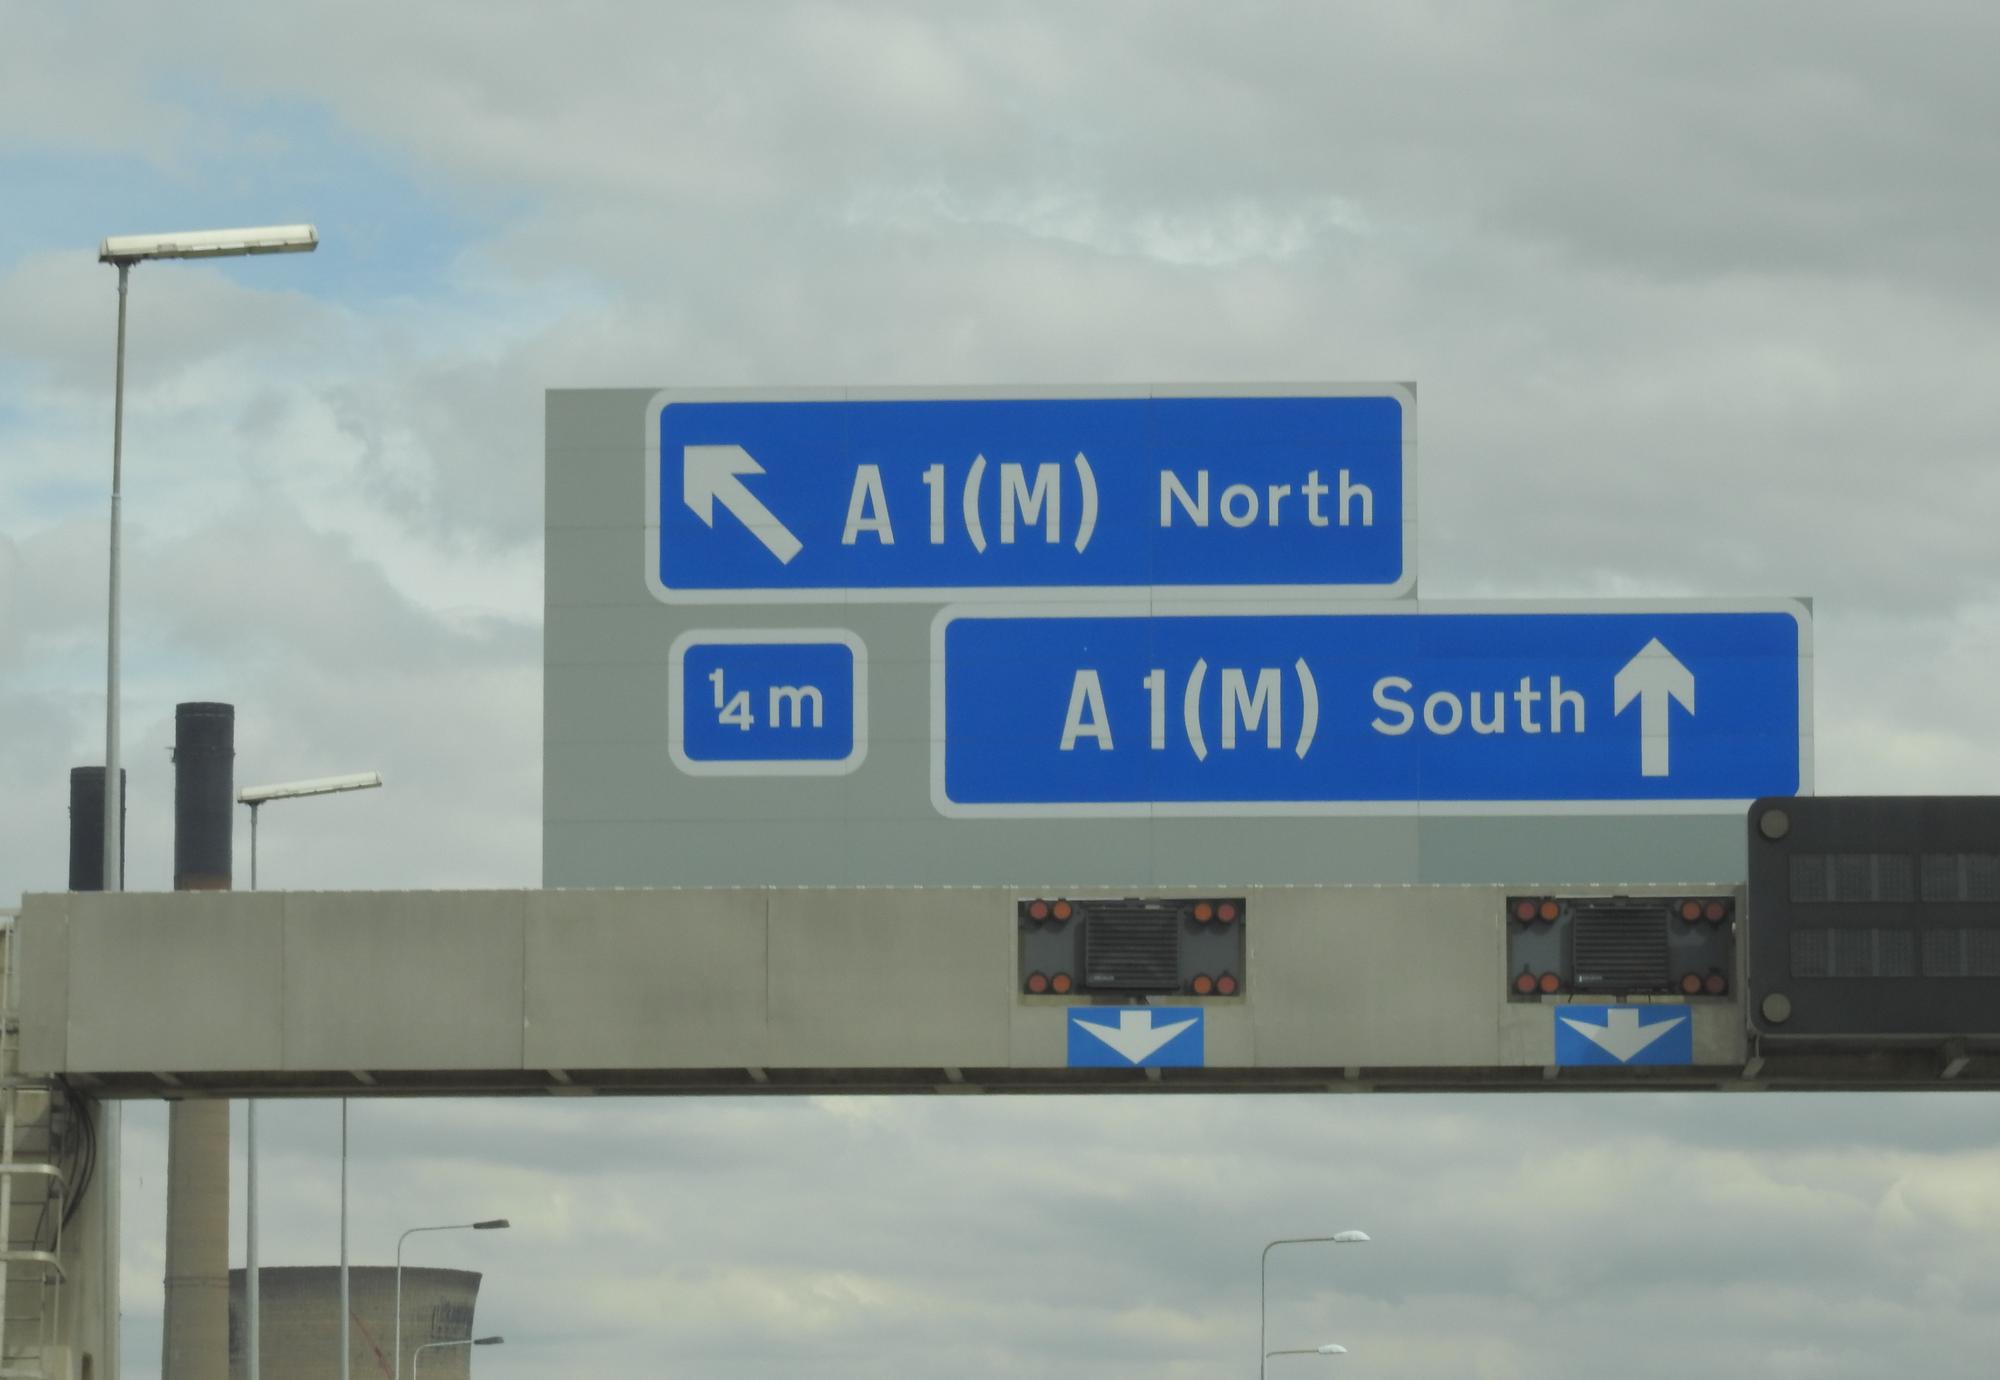 The North and South on motorway